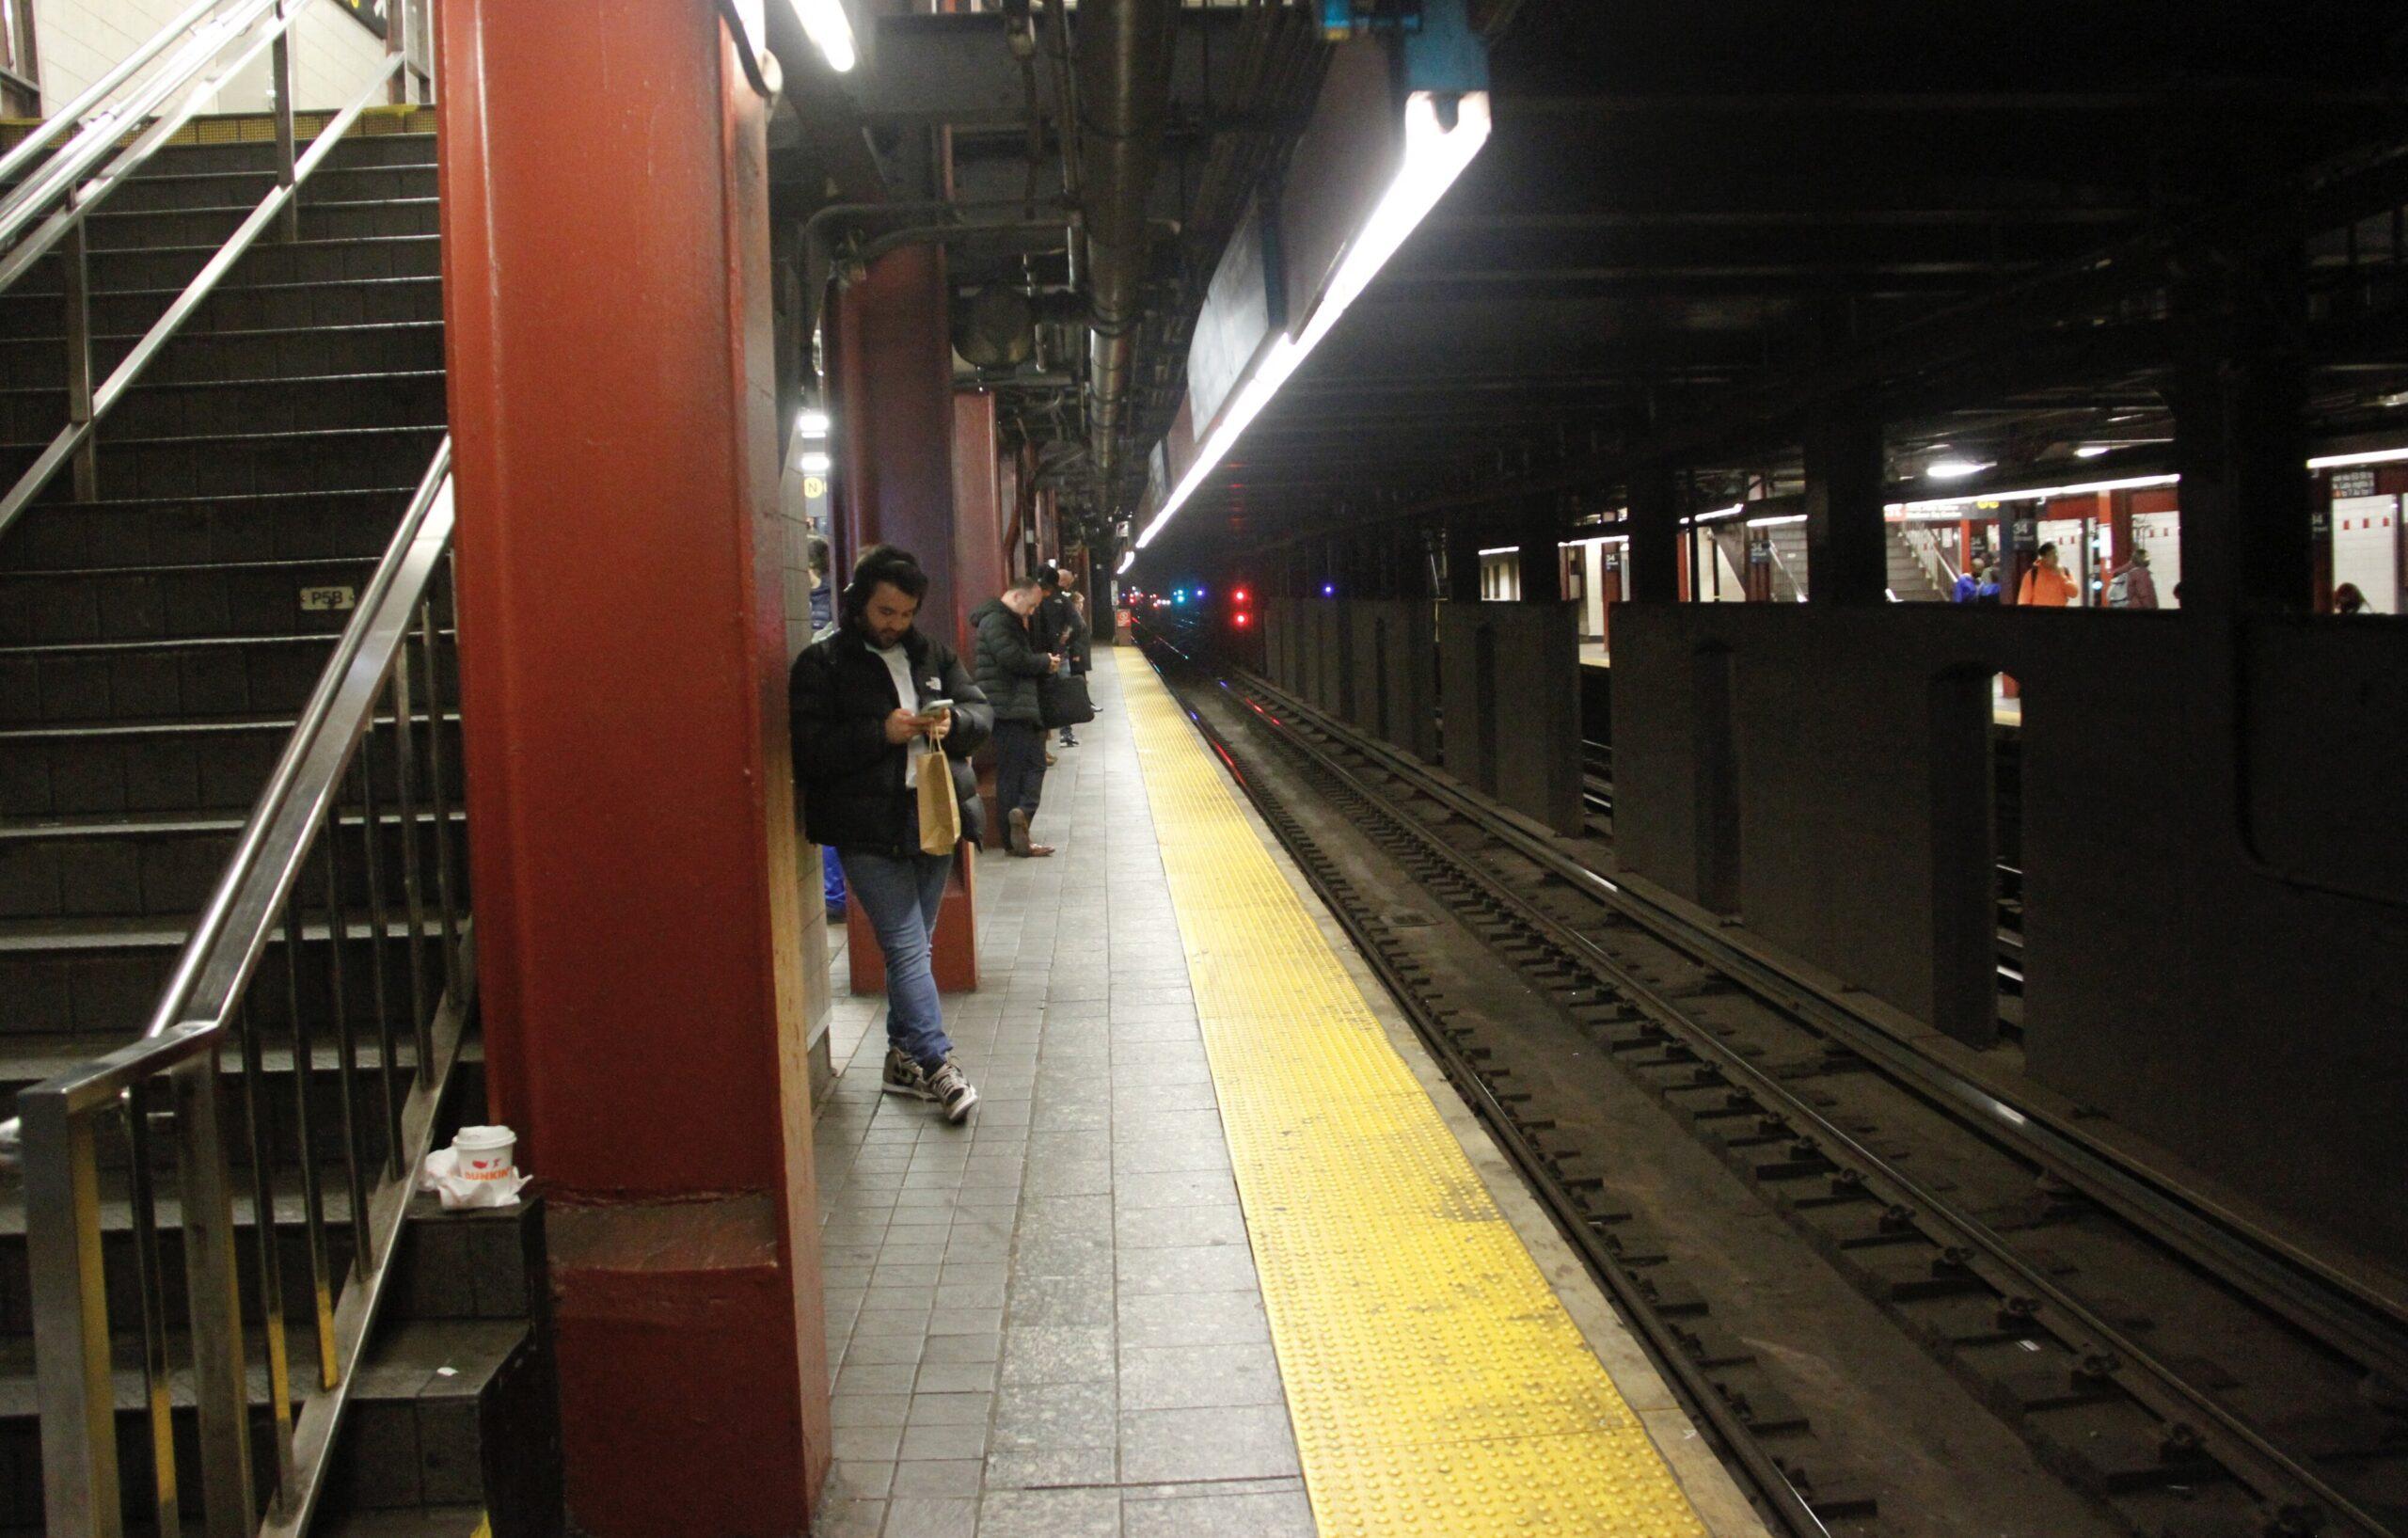 Shocking Video Shows Rats Running Out Of A Homeless Man’s Blanket In NYC Subway Platform